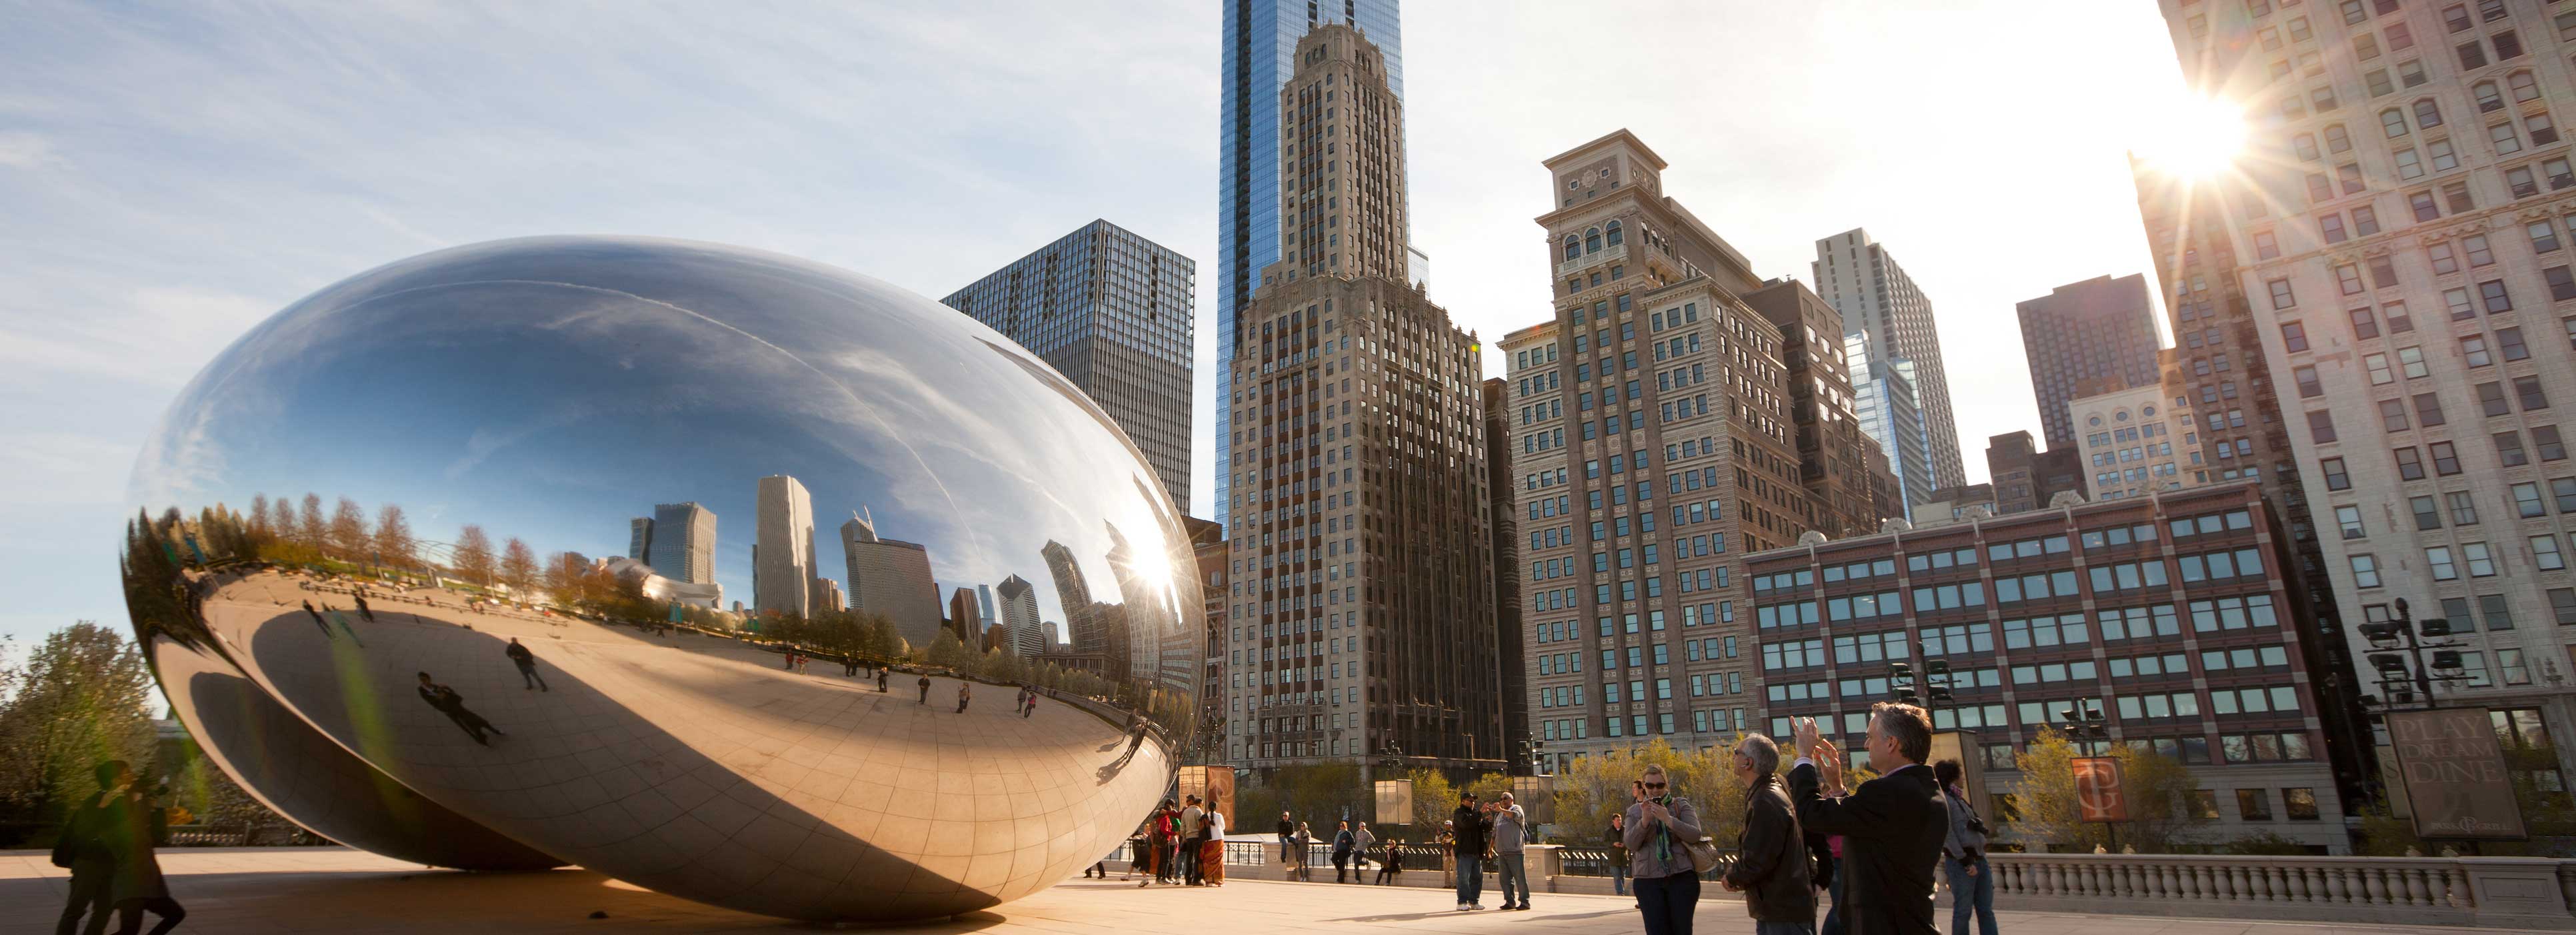 Photo of the iconic bean in Chicago